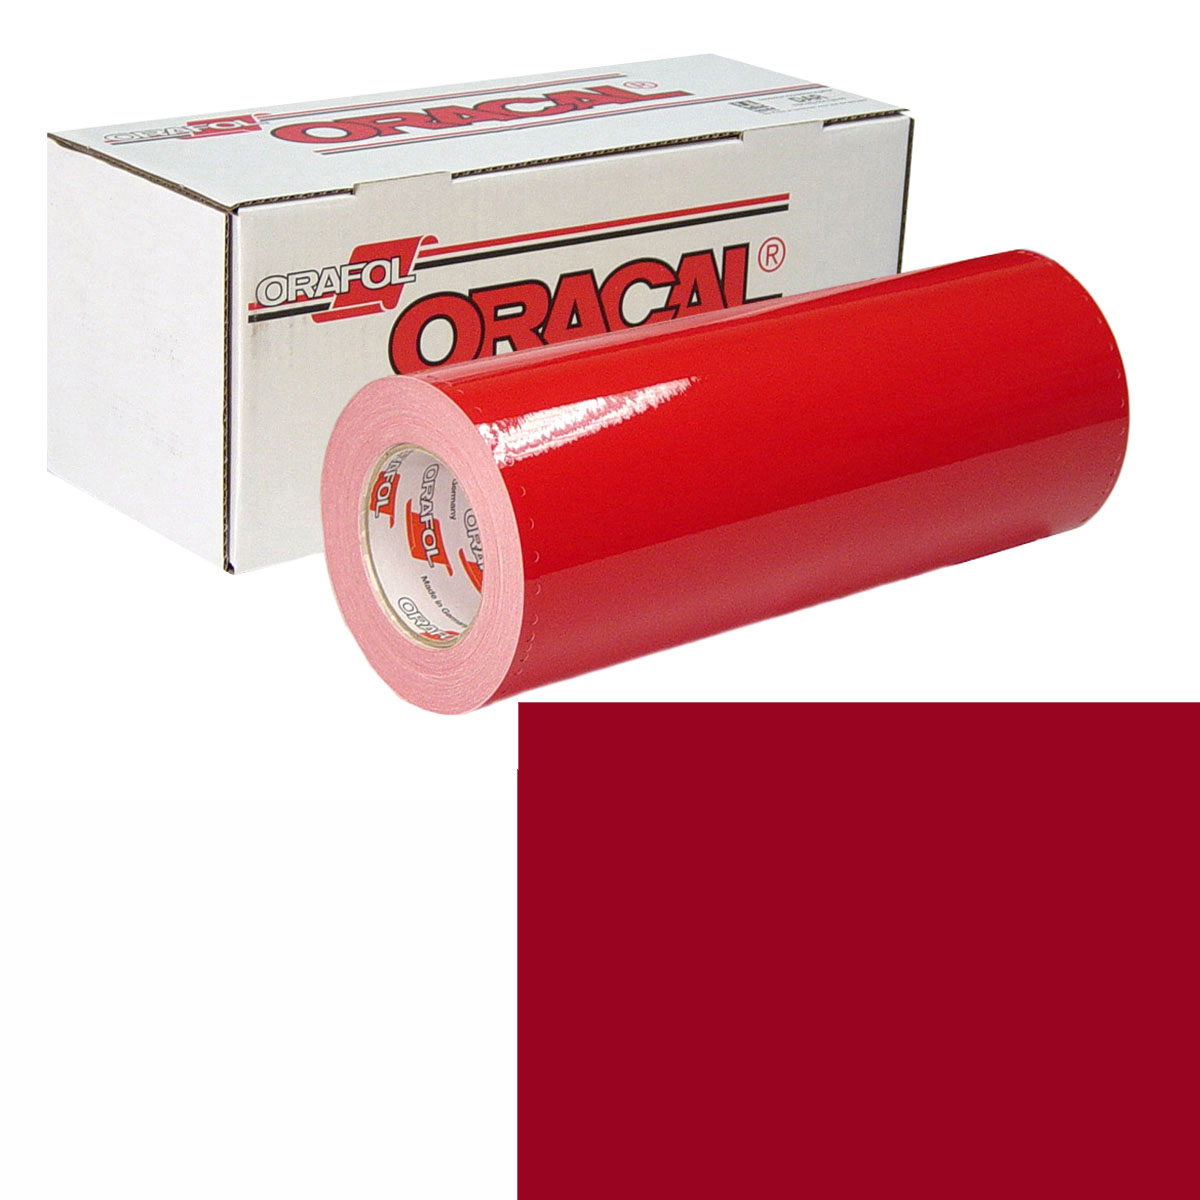 ORACAL 951 30in X 10yd 348 Scarlet Red